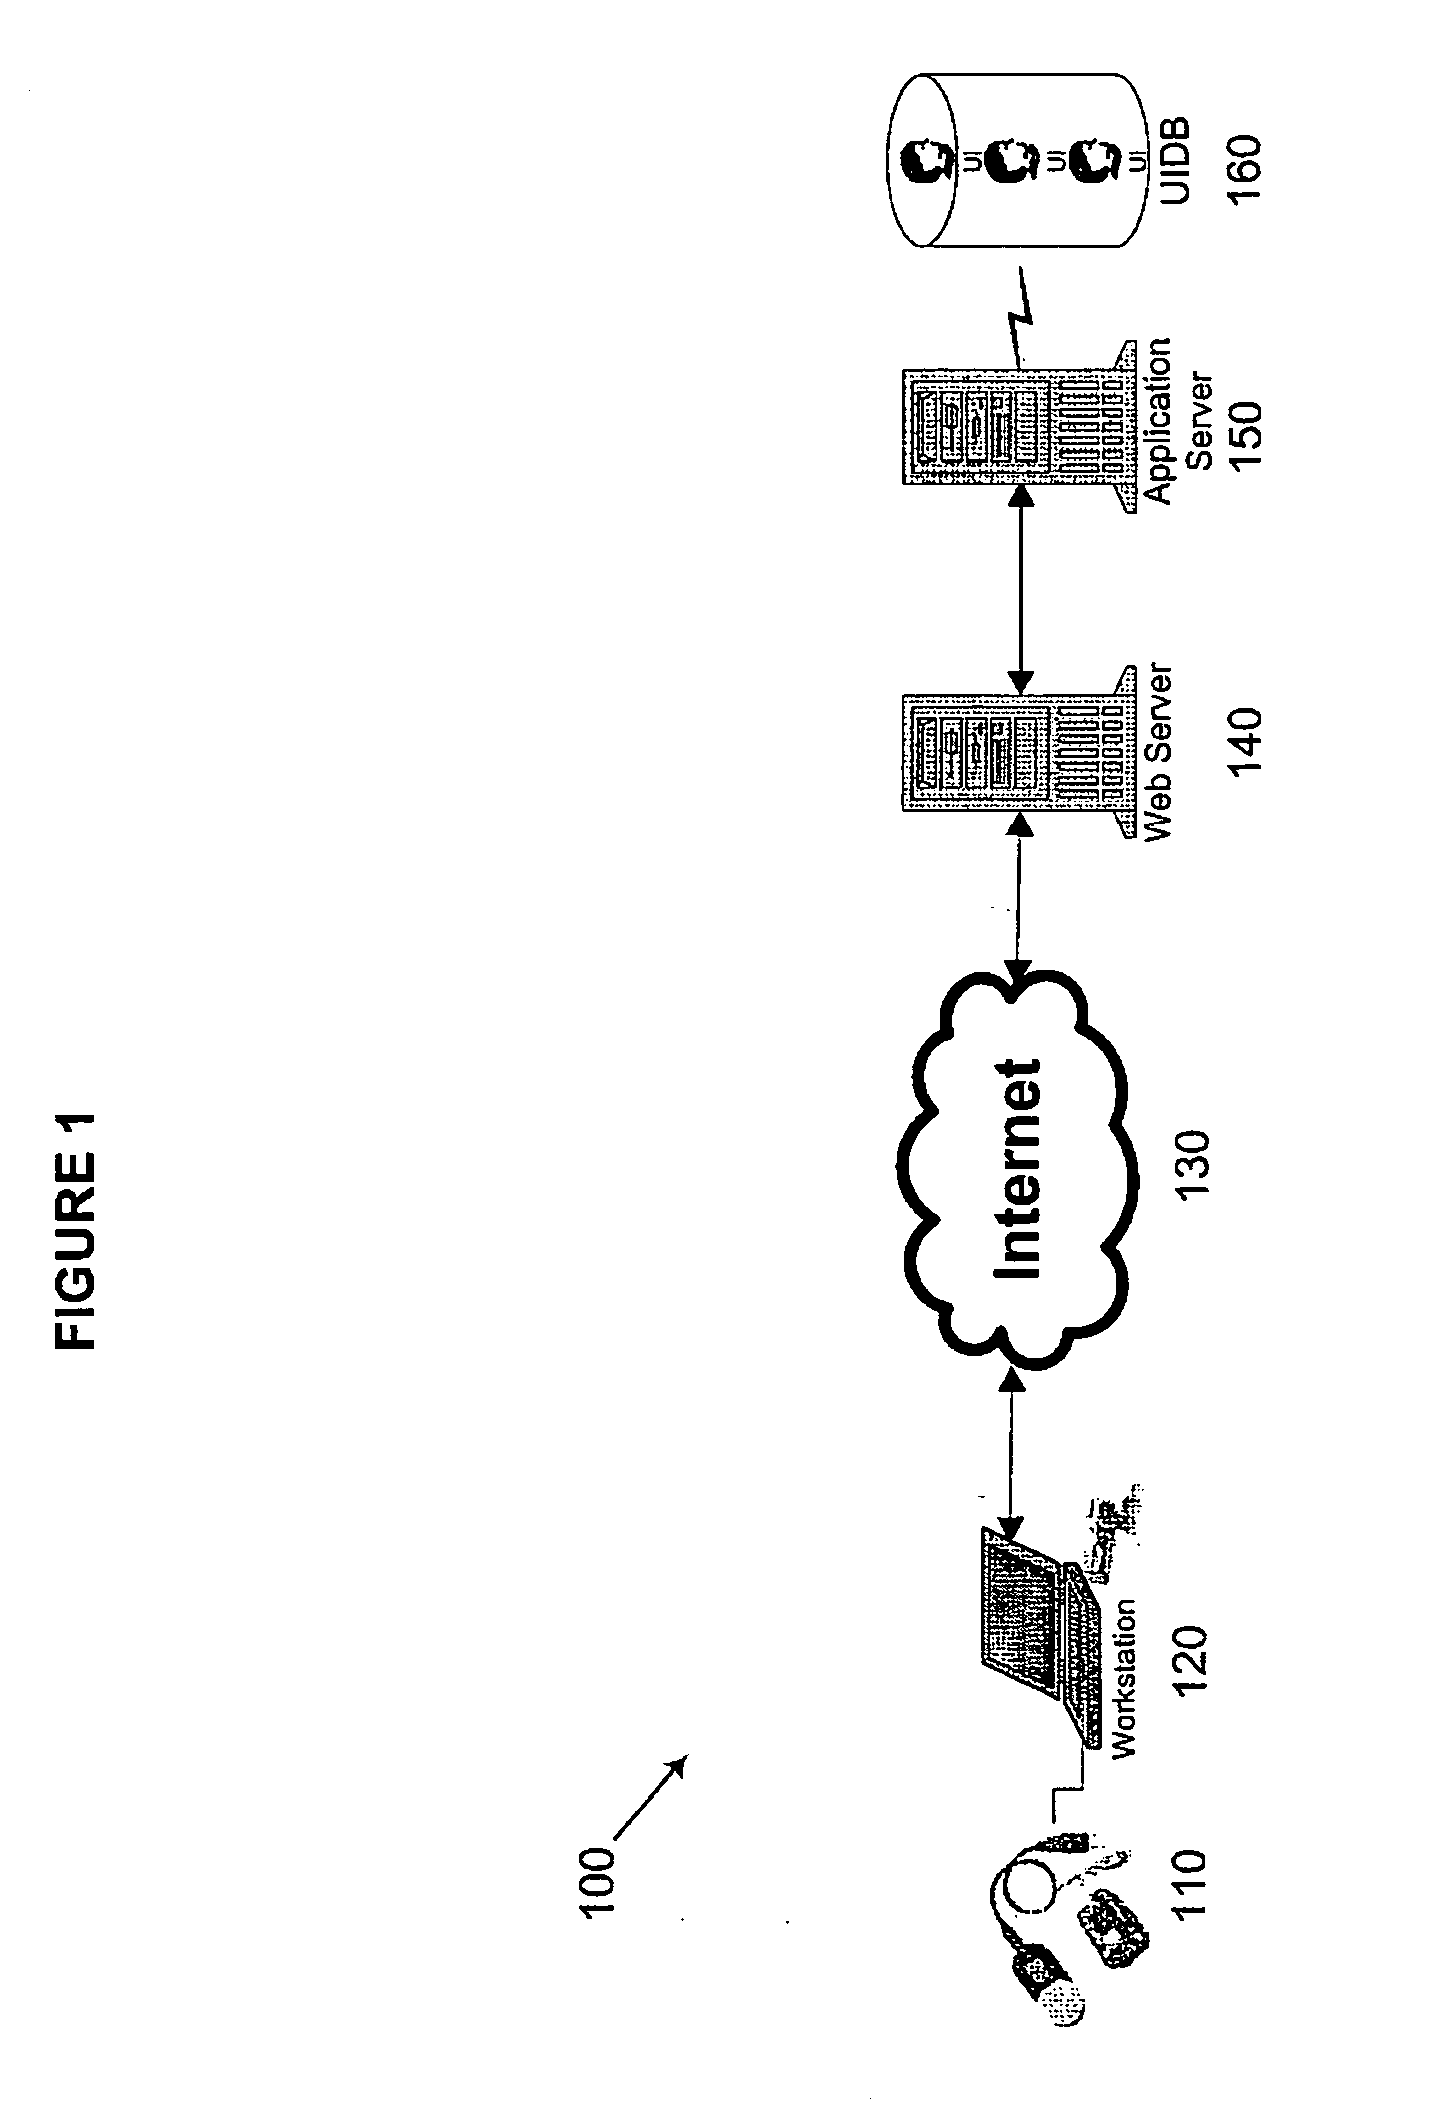 Method and apparatus for producing a biometric identification reference template